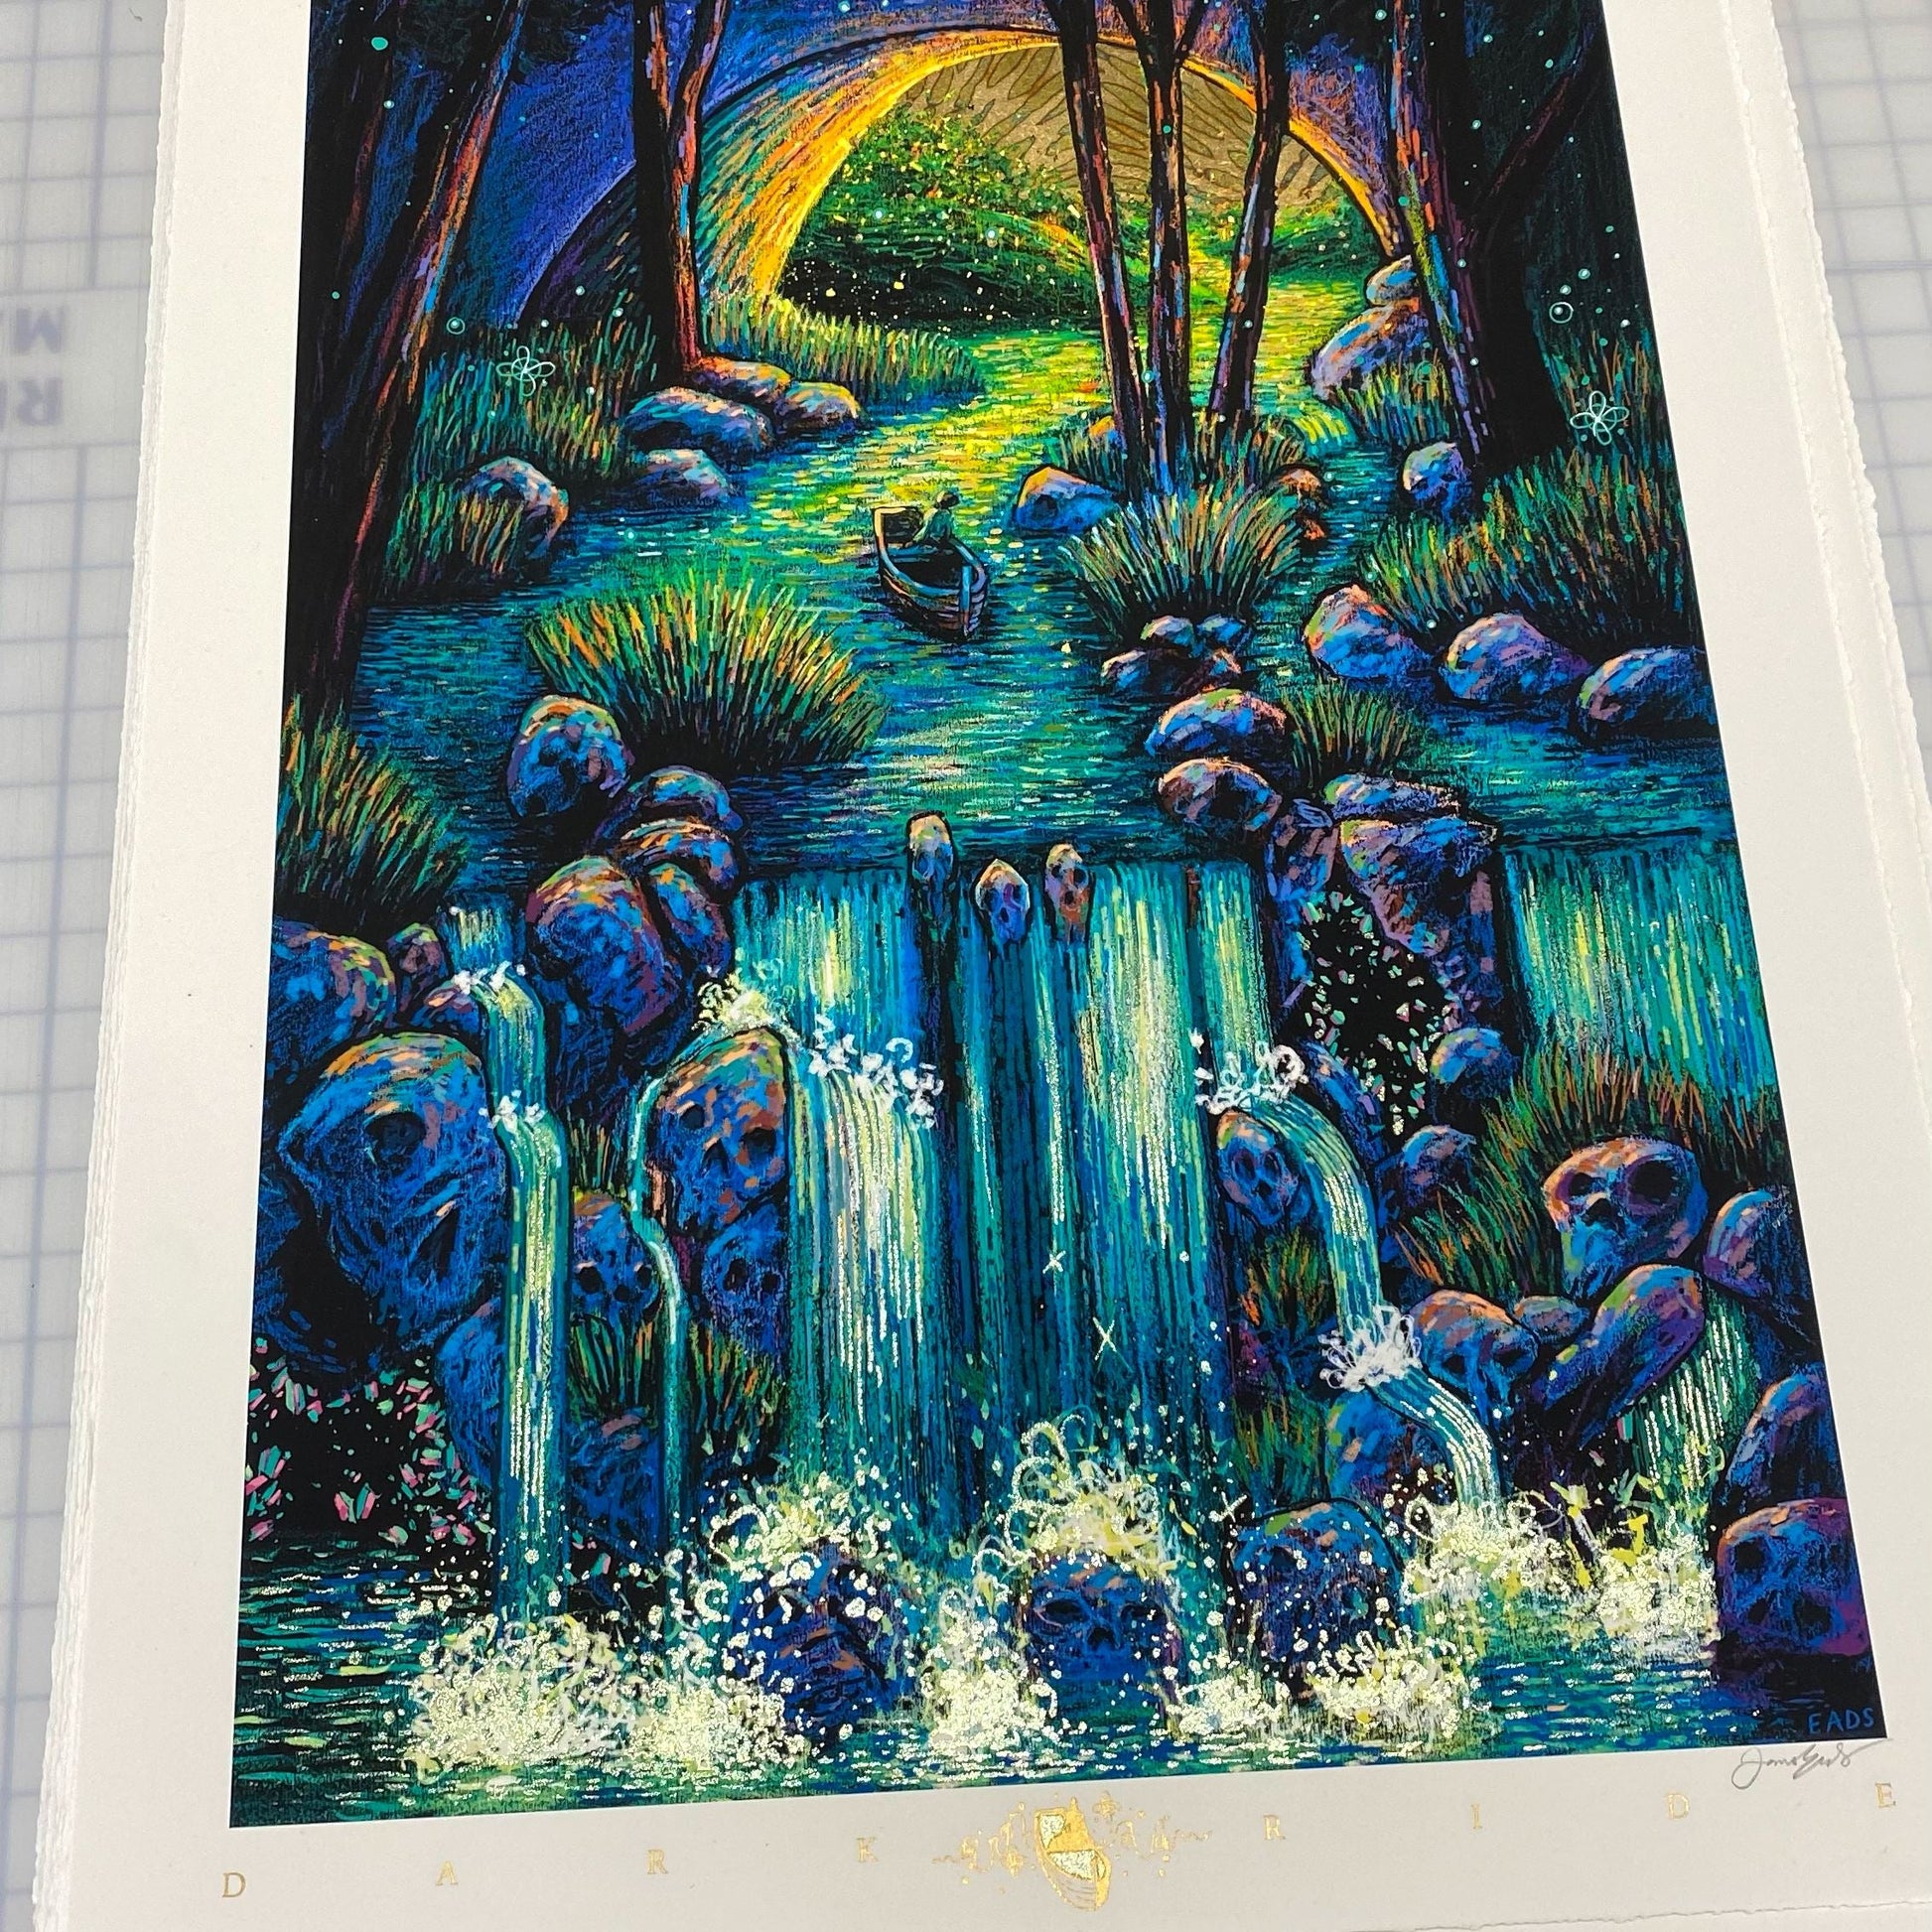 Dark Ride (Limited Edition of 90) Print James R. Eads